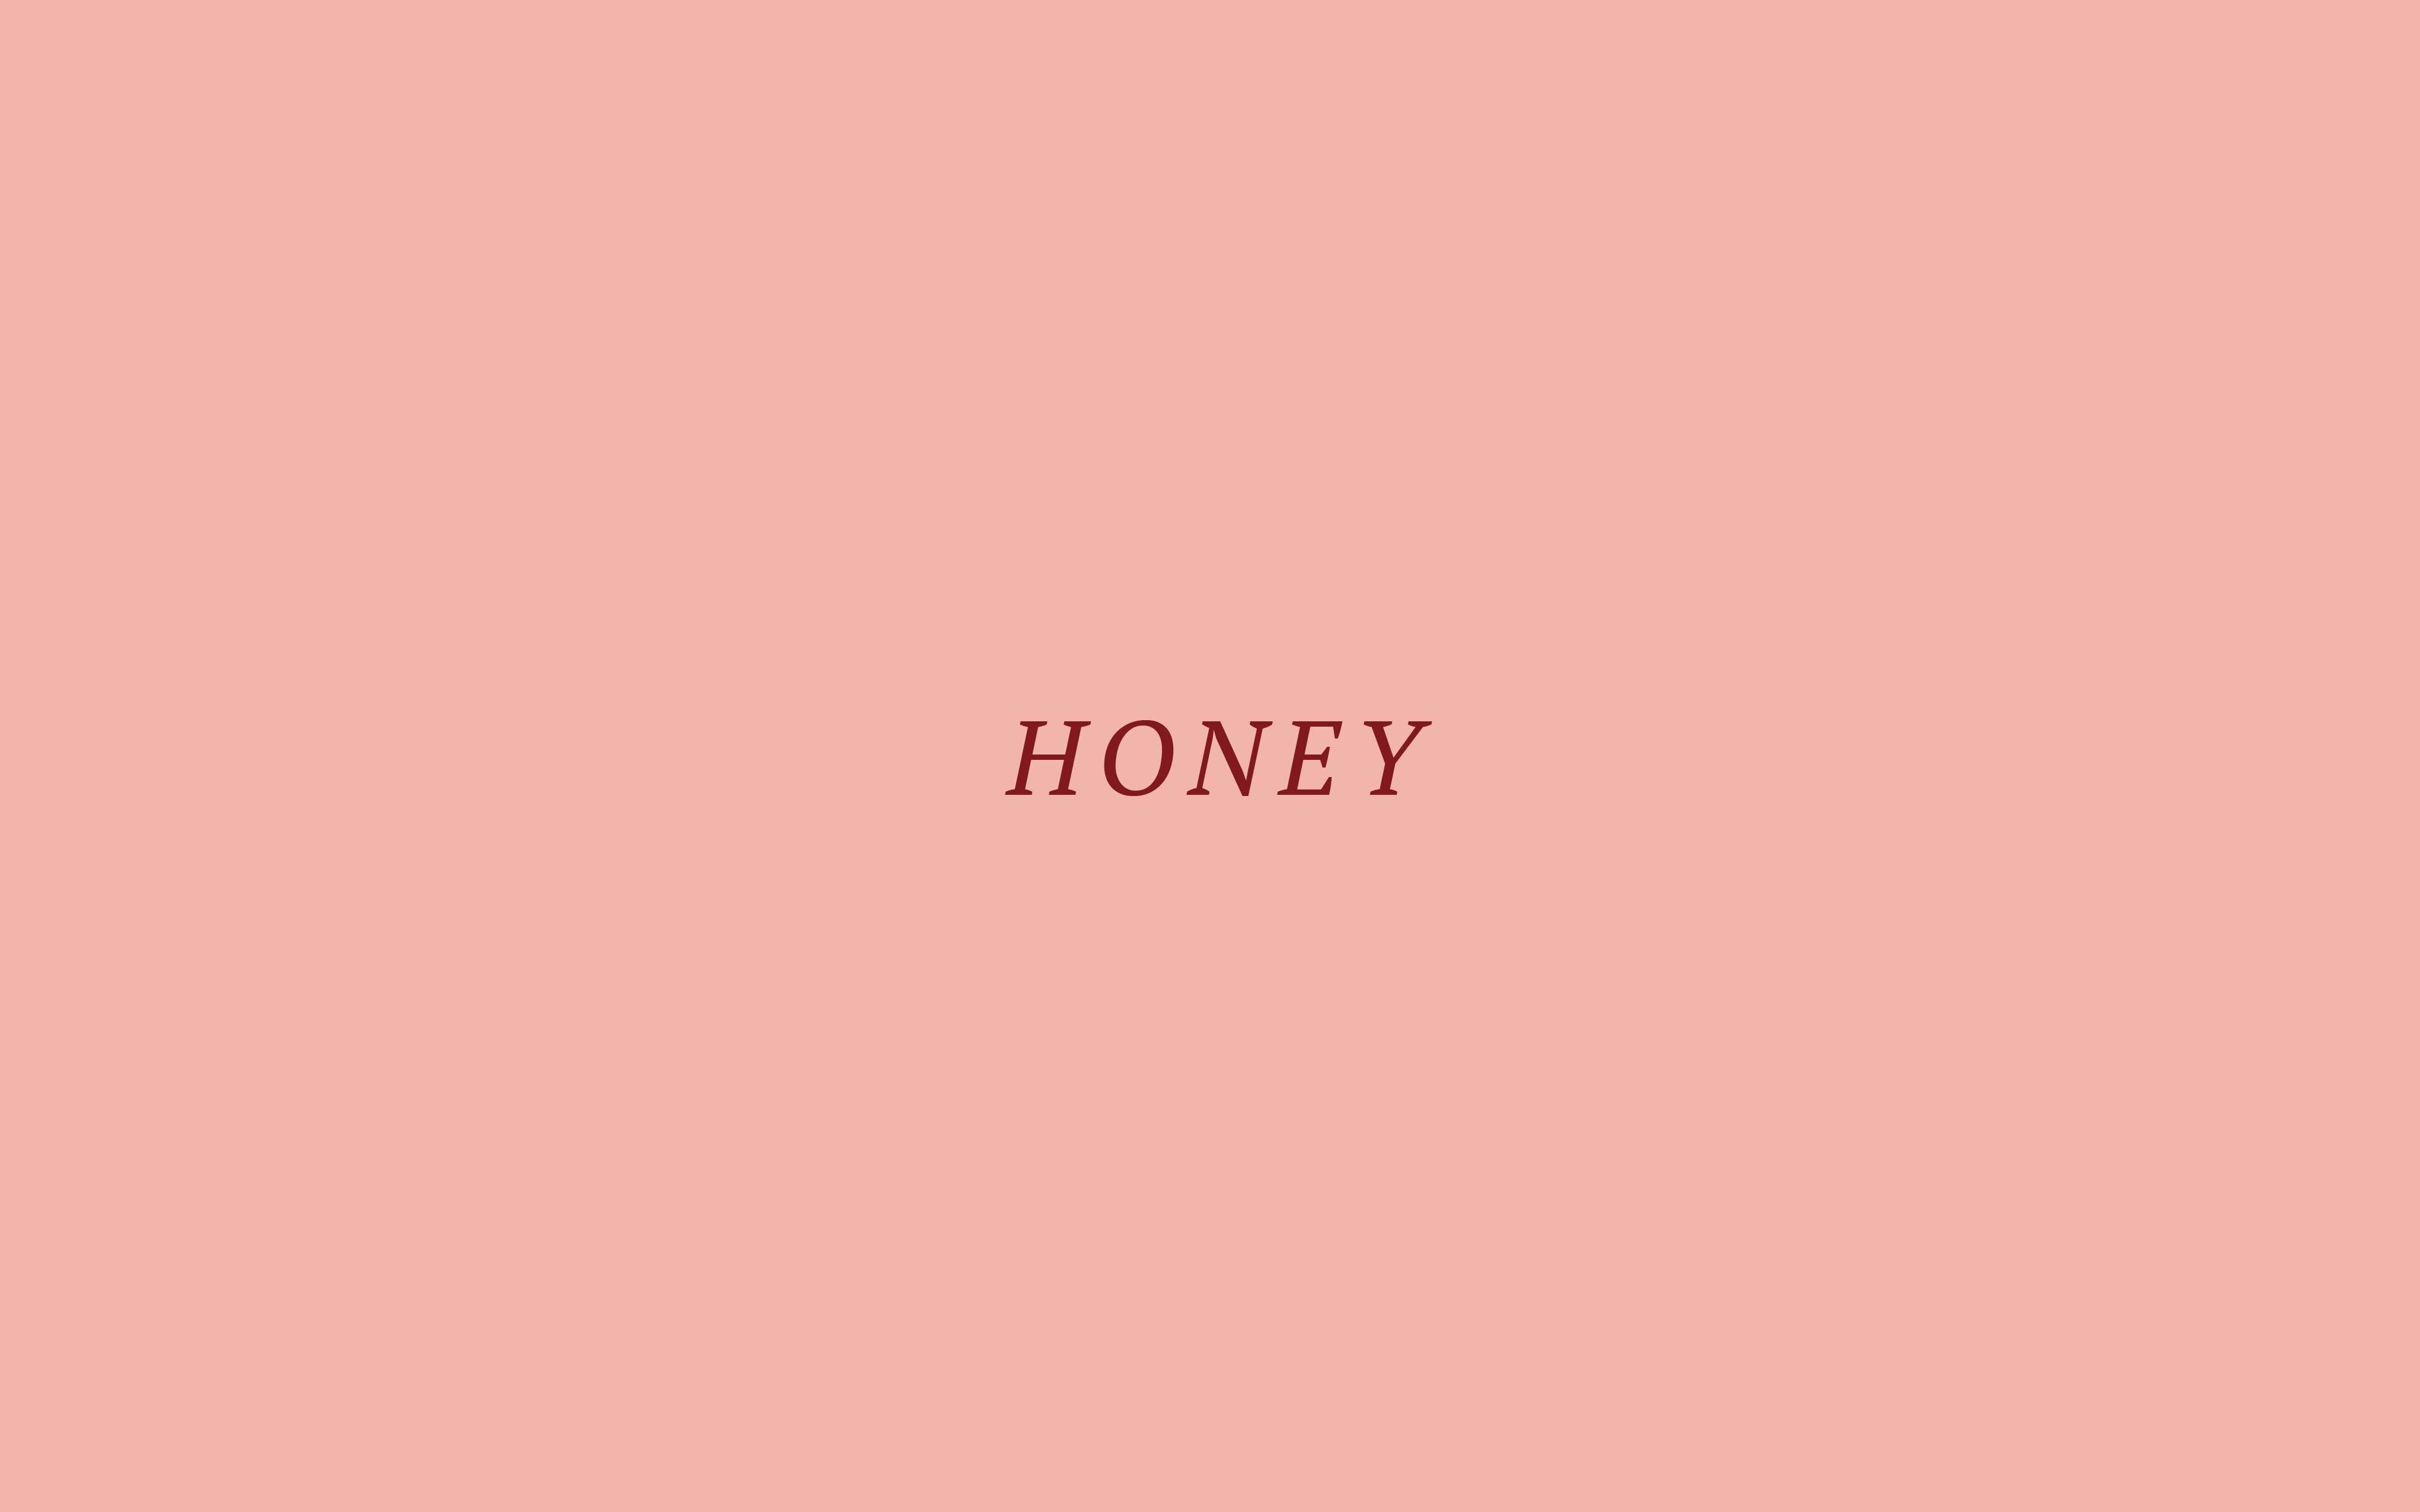 The word honey in red text on a pink background - Baddie